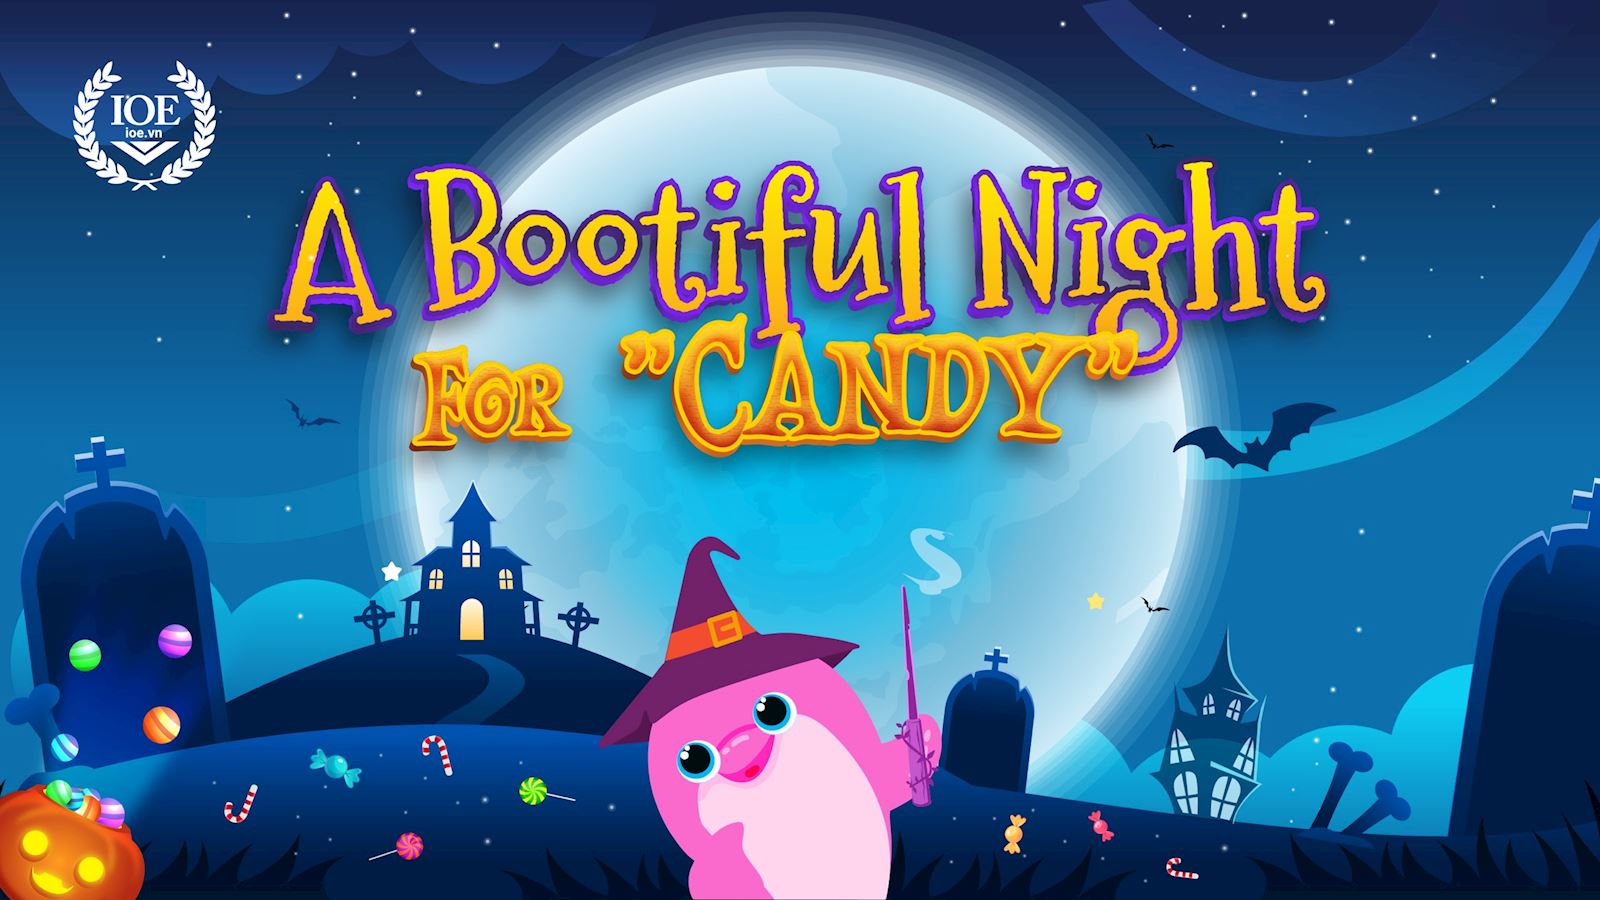 Halloween: A Bootiful Night For "Candy"